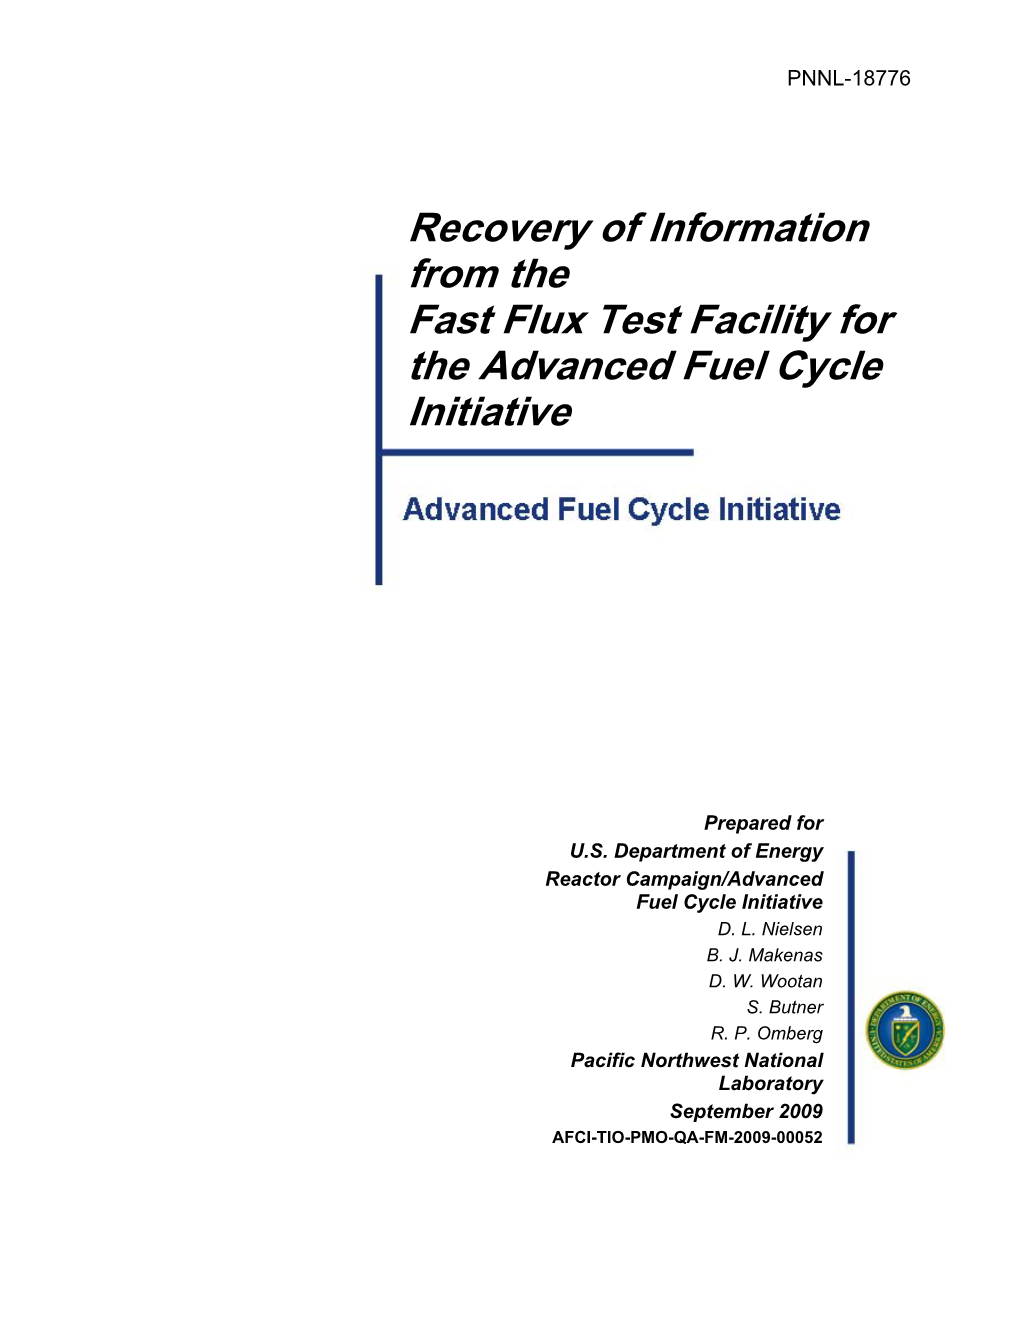 Recovery of Information from the Fast Flux Test Facility for the Advanced Fuel Cycle Initiative